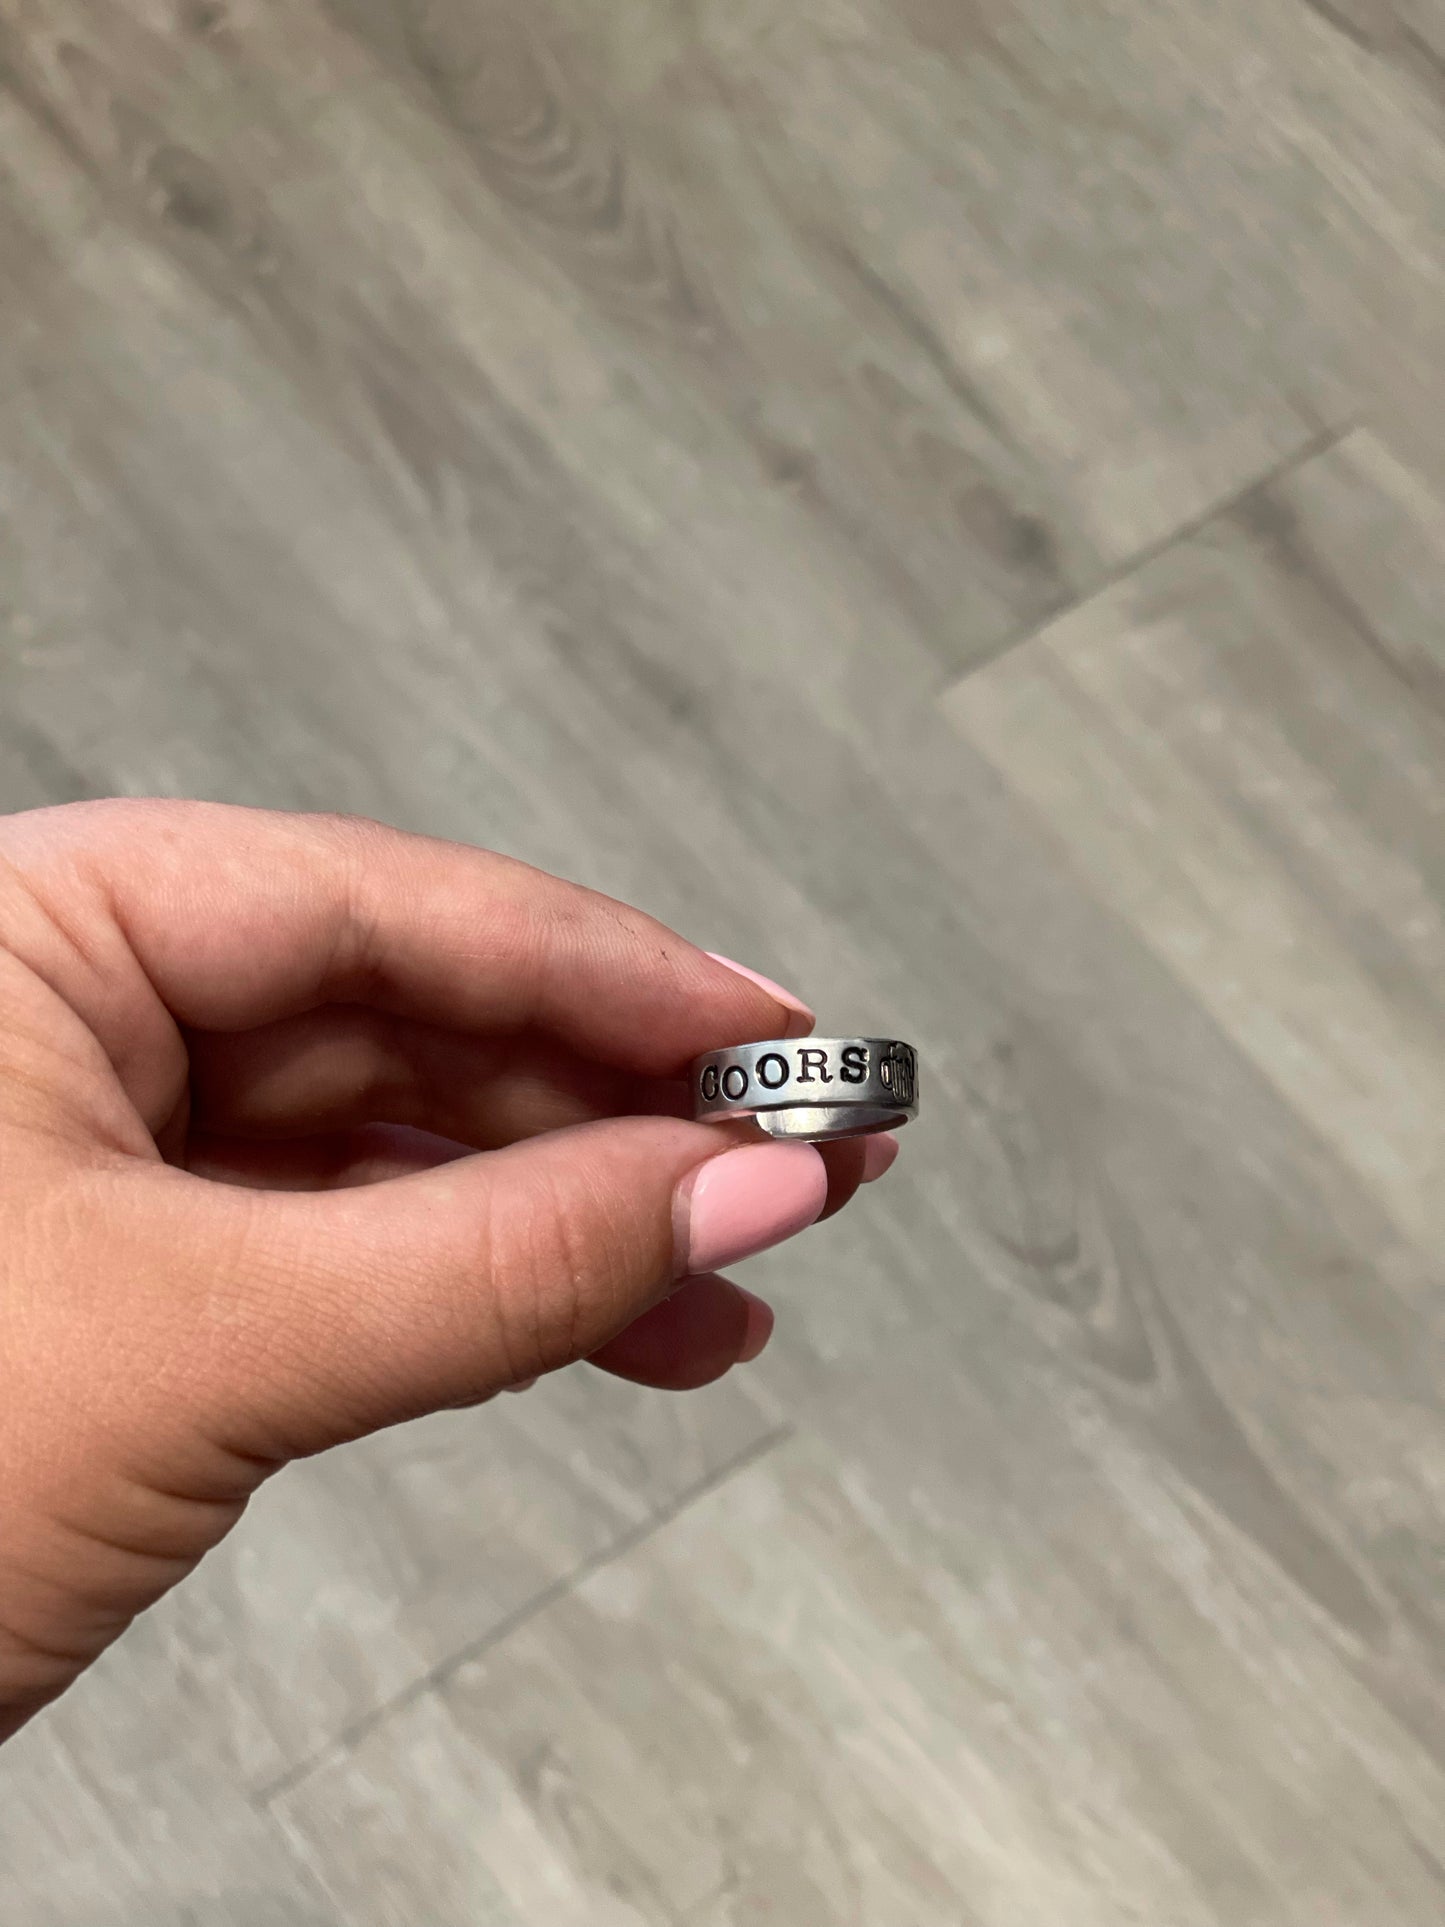 Coors Rodeo Stamped Ring